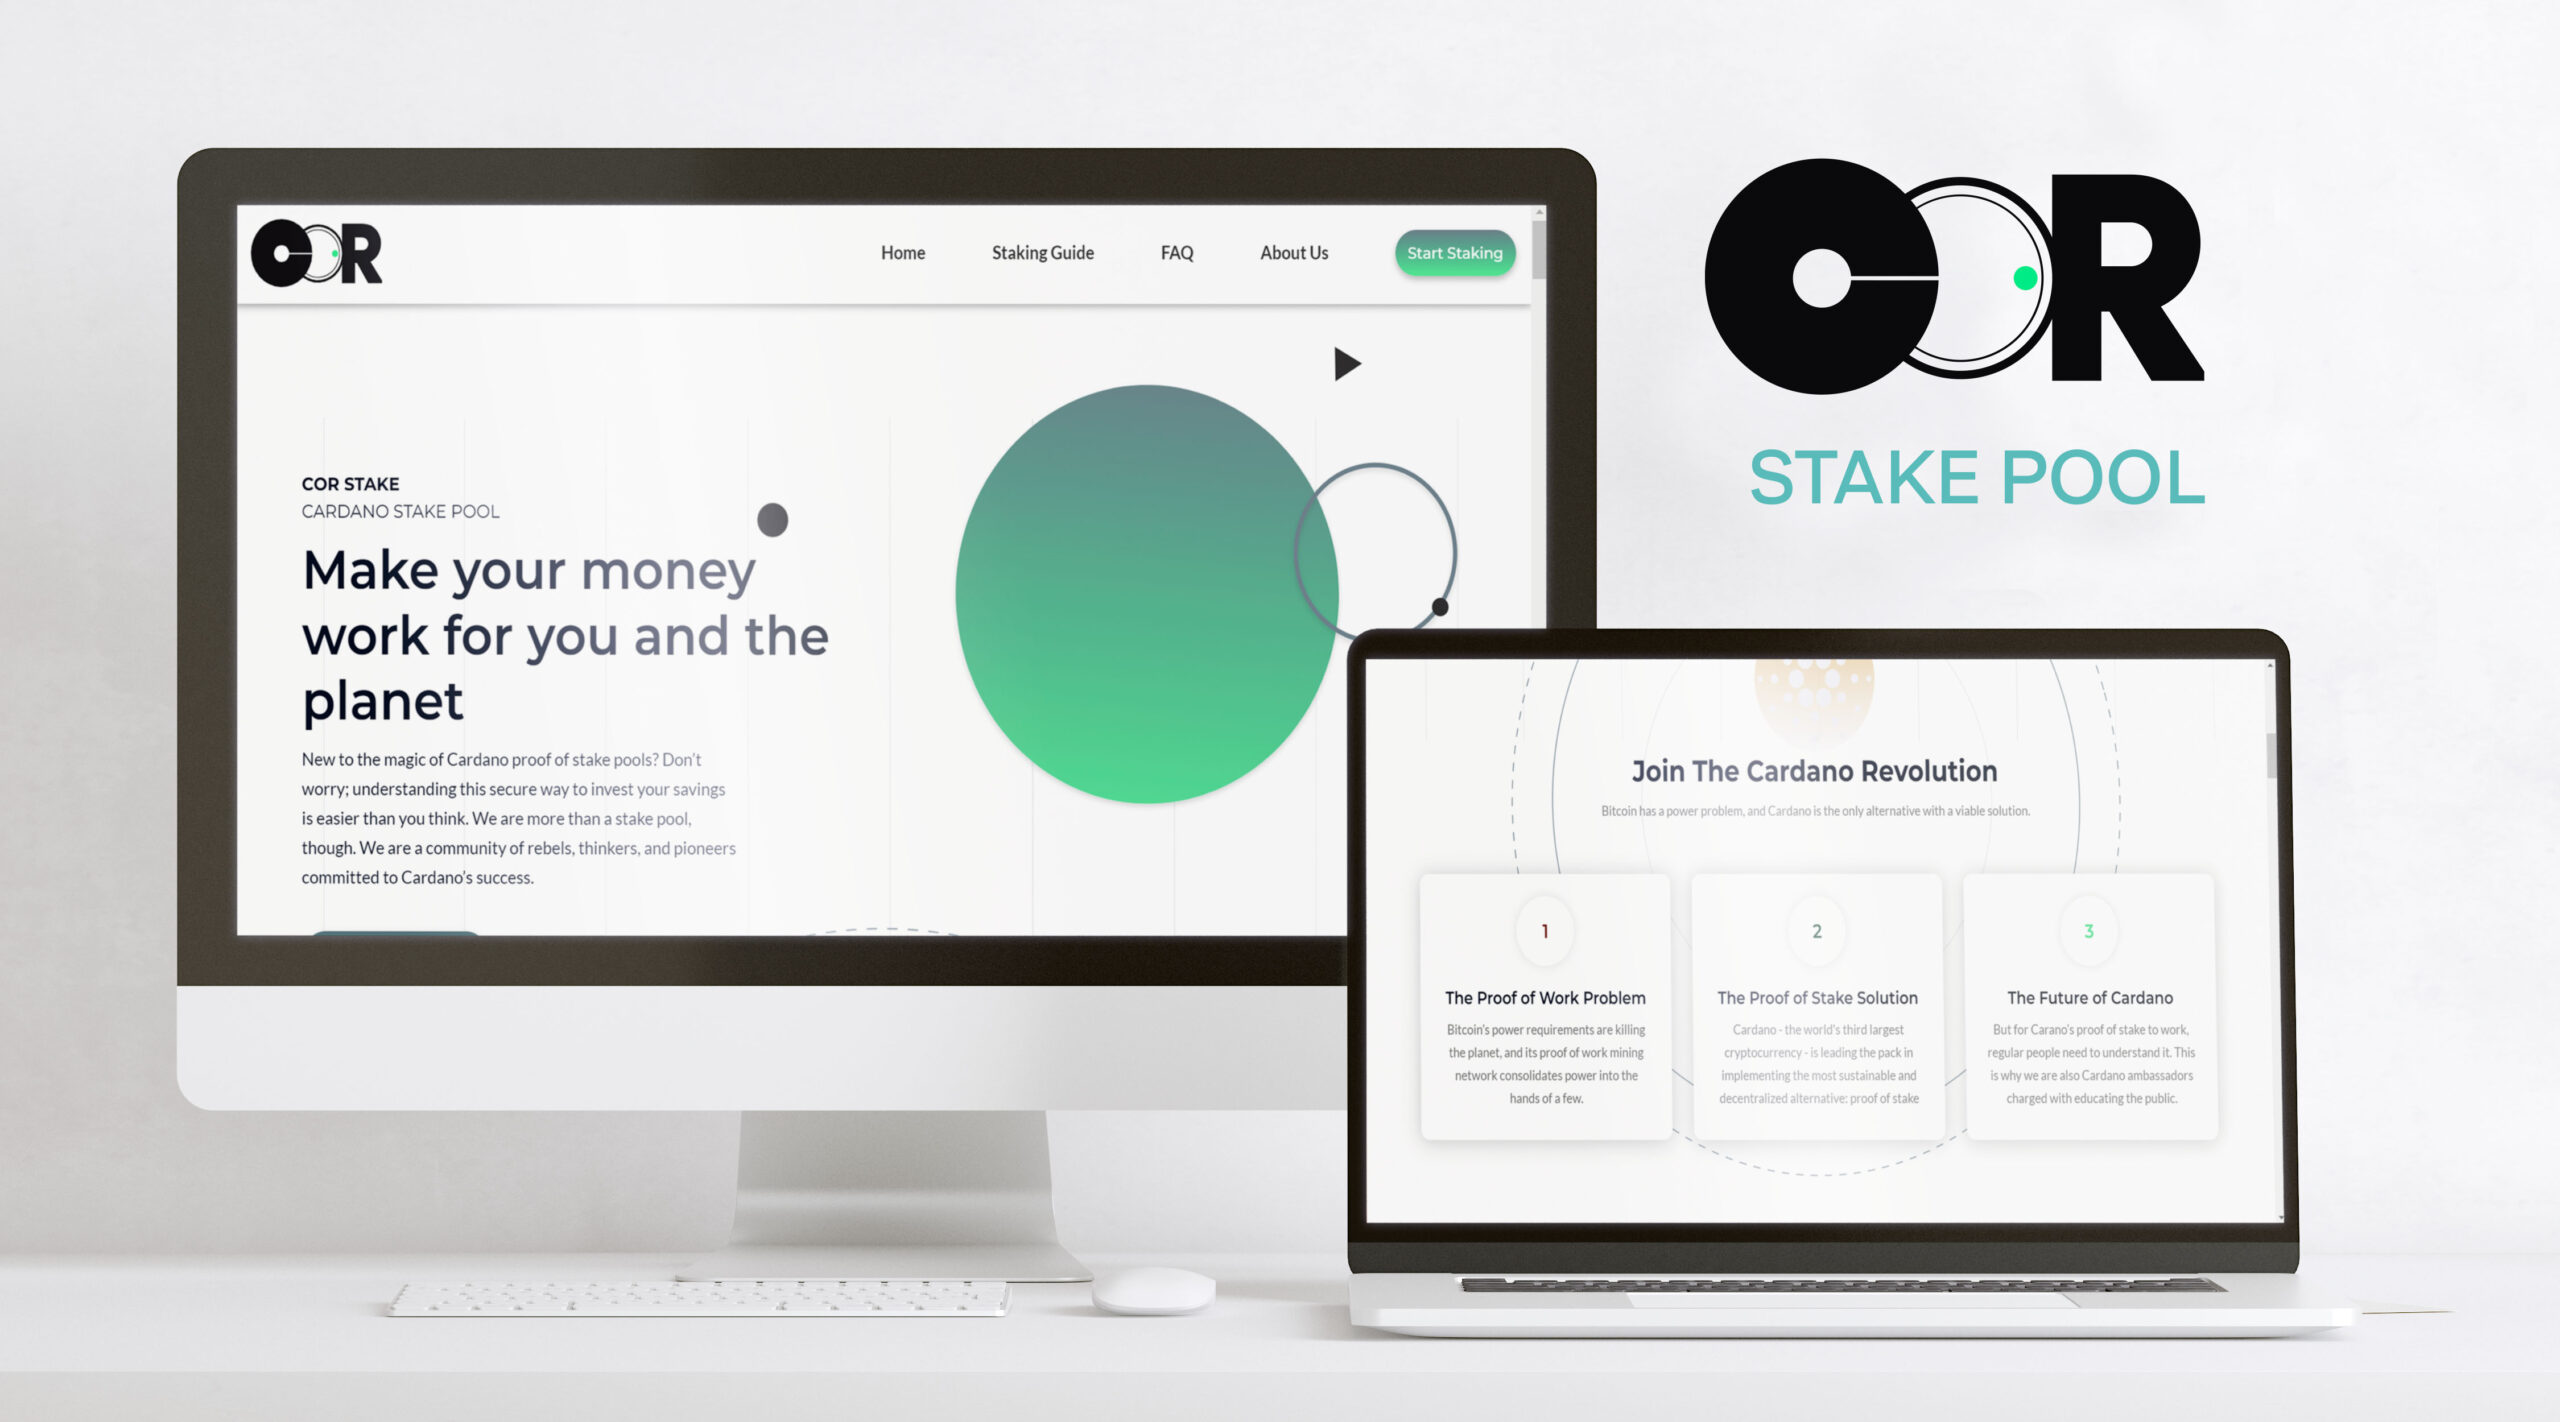 COR Stake Pool Website - Discover information about the COR stake pool and its services